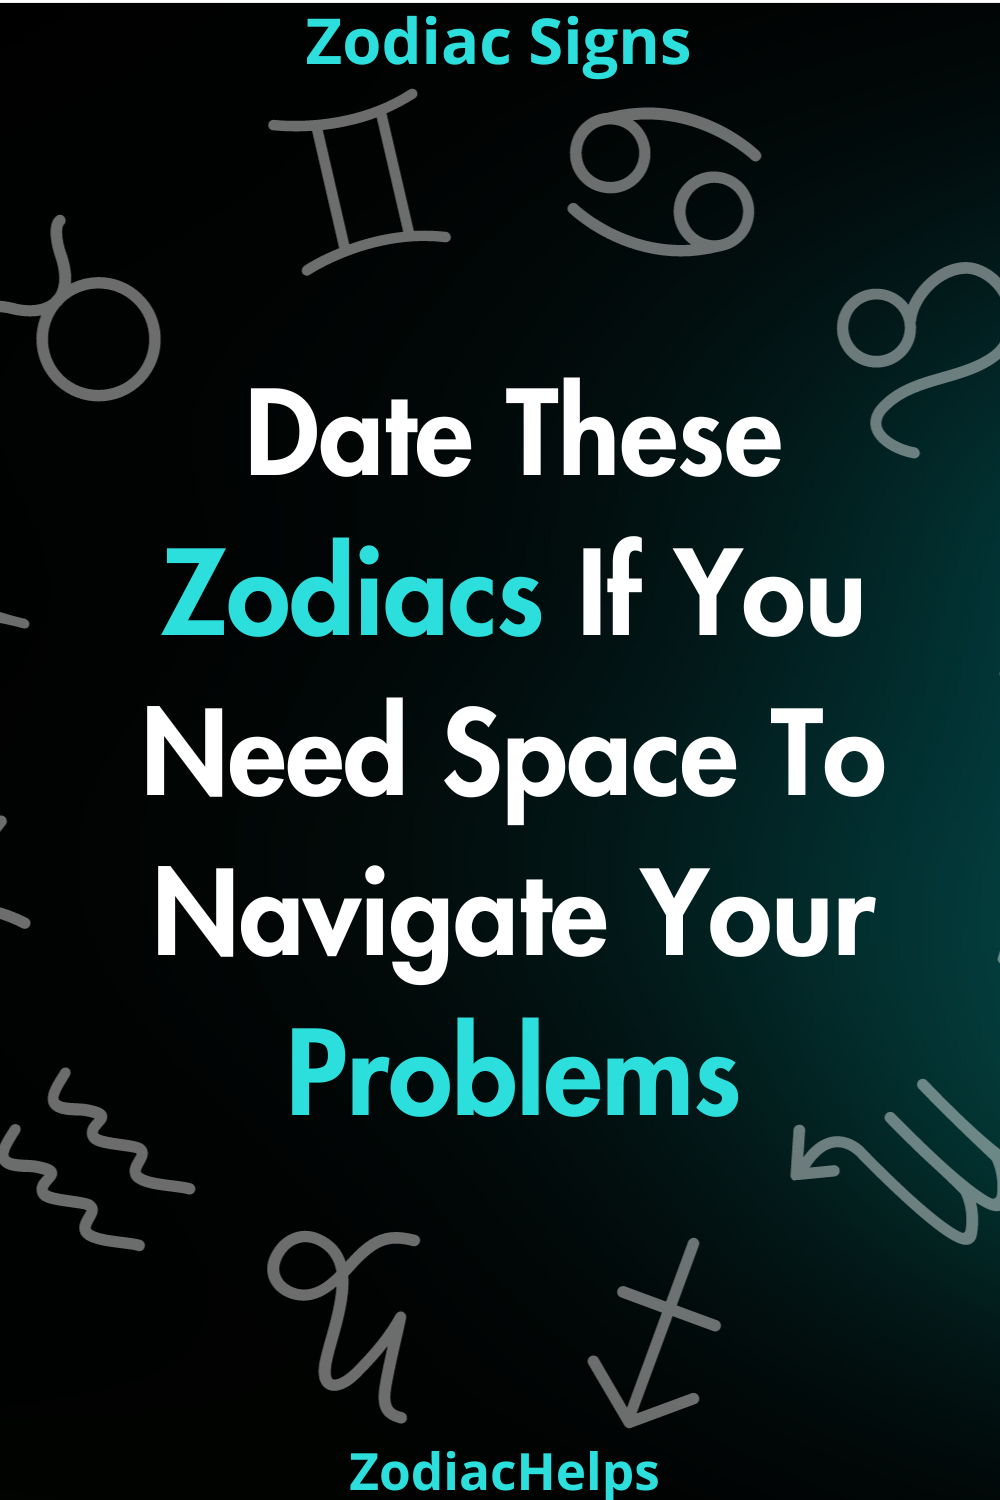 Date These Zodiacs If You Need Space To Navigate Your Problems